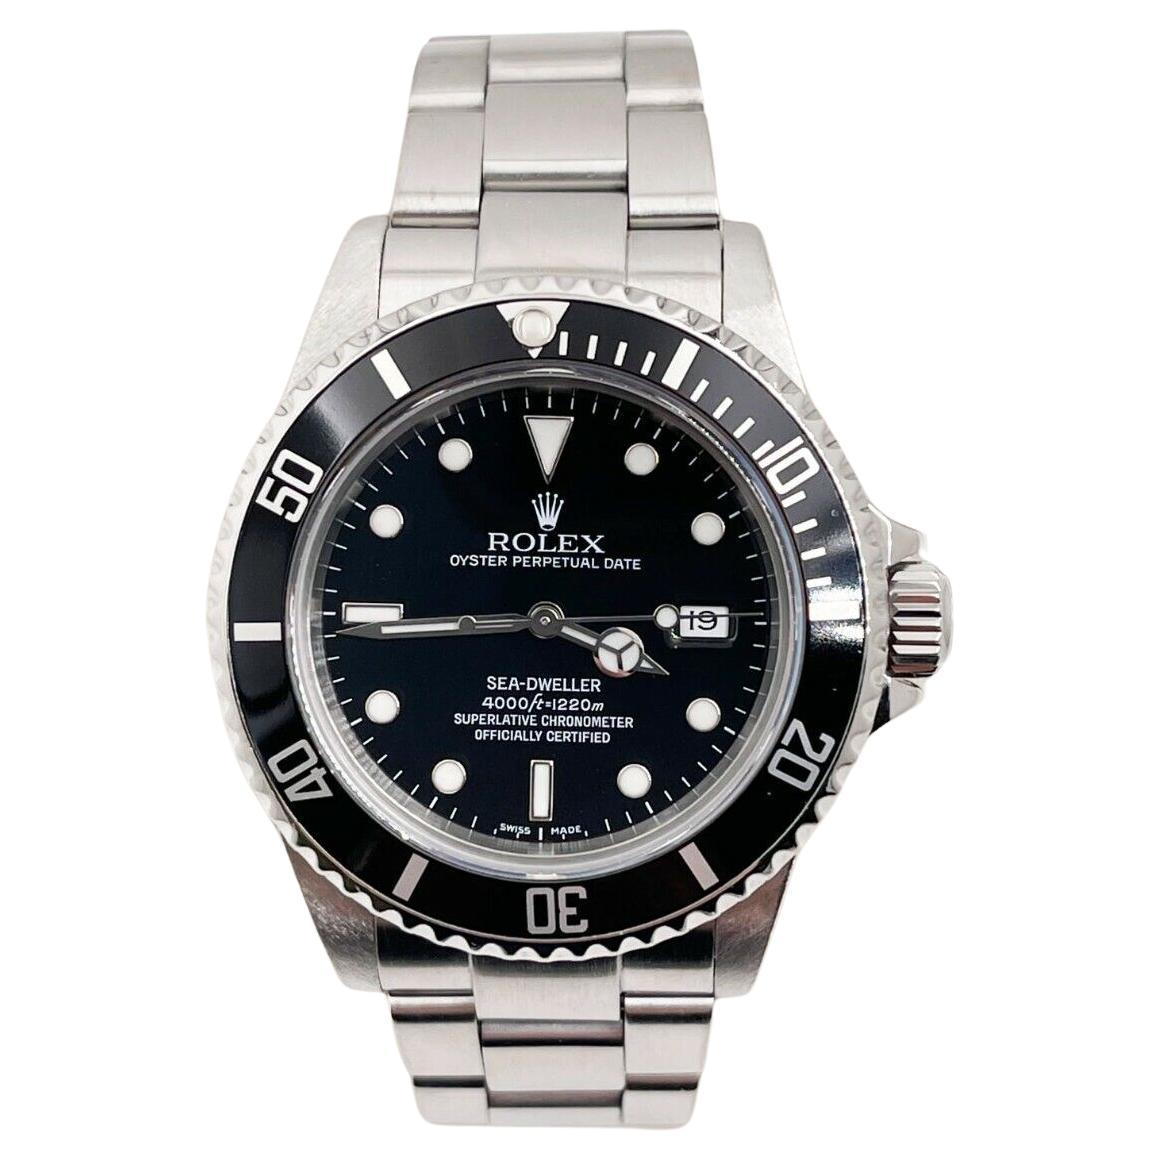 1984 Rolex Sea Dweller 16660 Black Dial Stainless Steel Box Service Paper For Sale